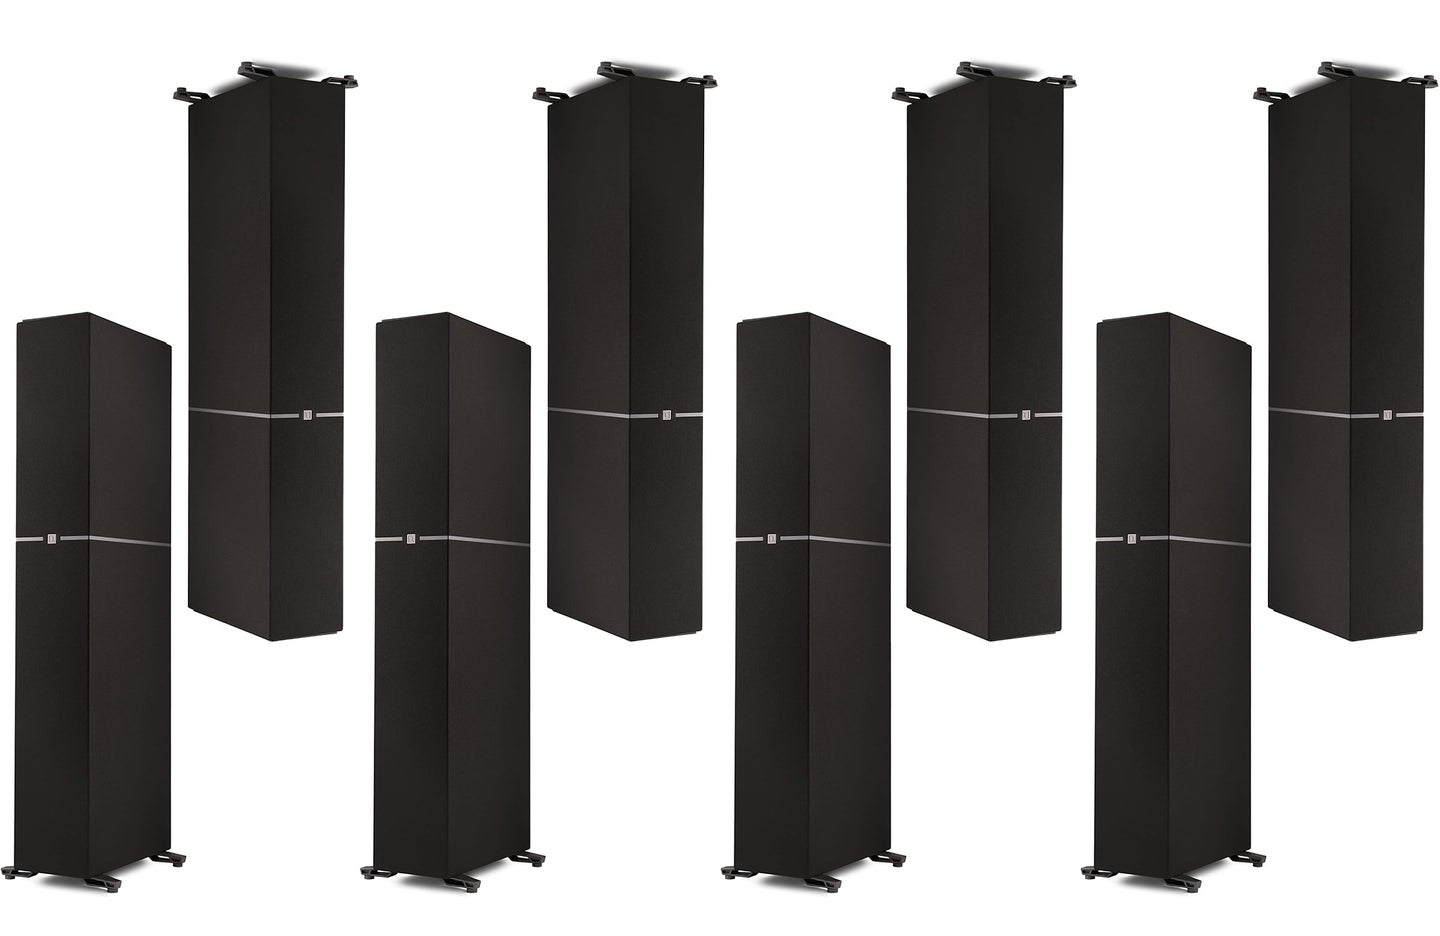 Eight Definitive Technology DM70 speakers in a decorative pattern